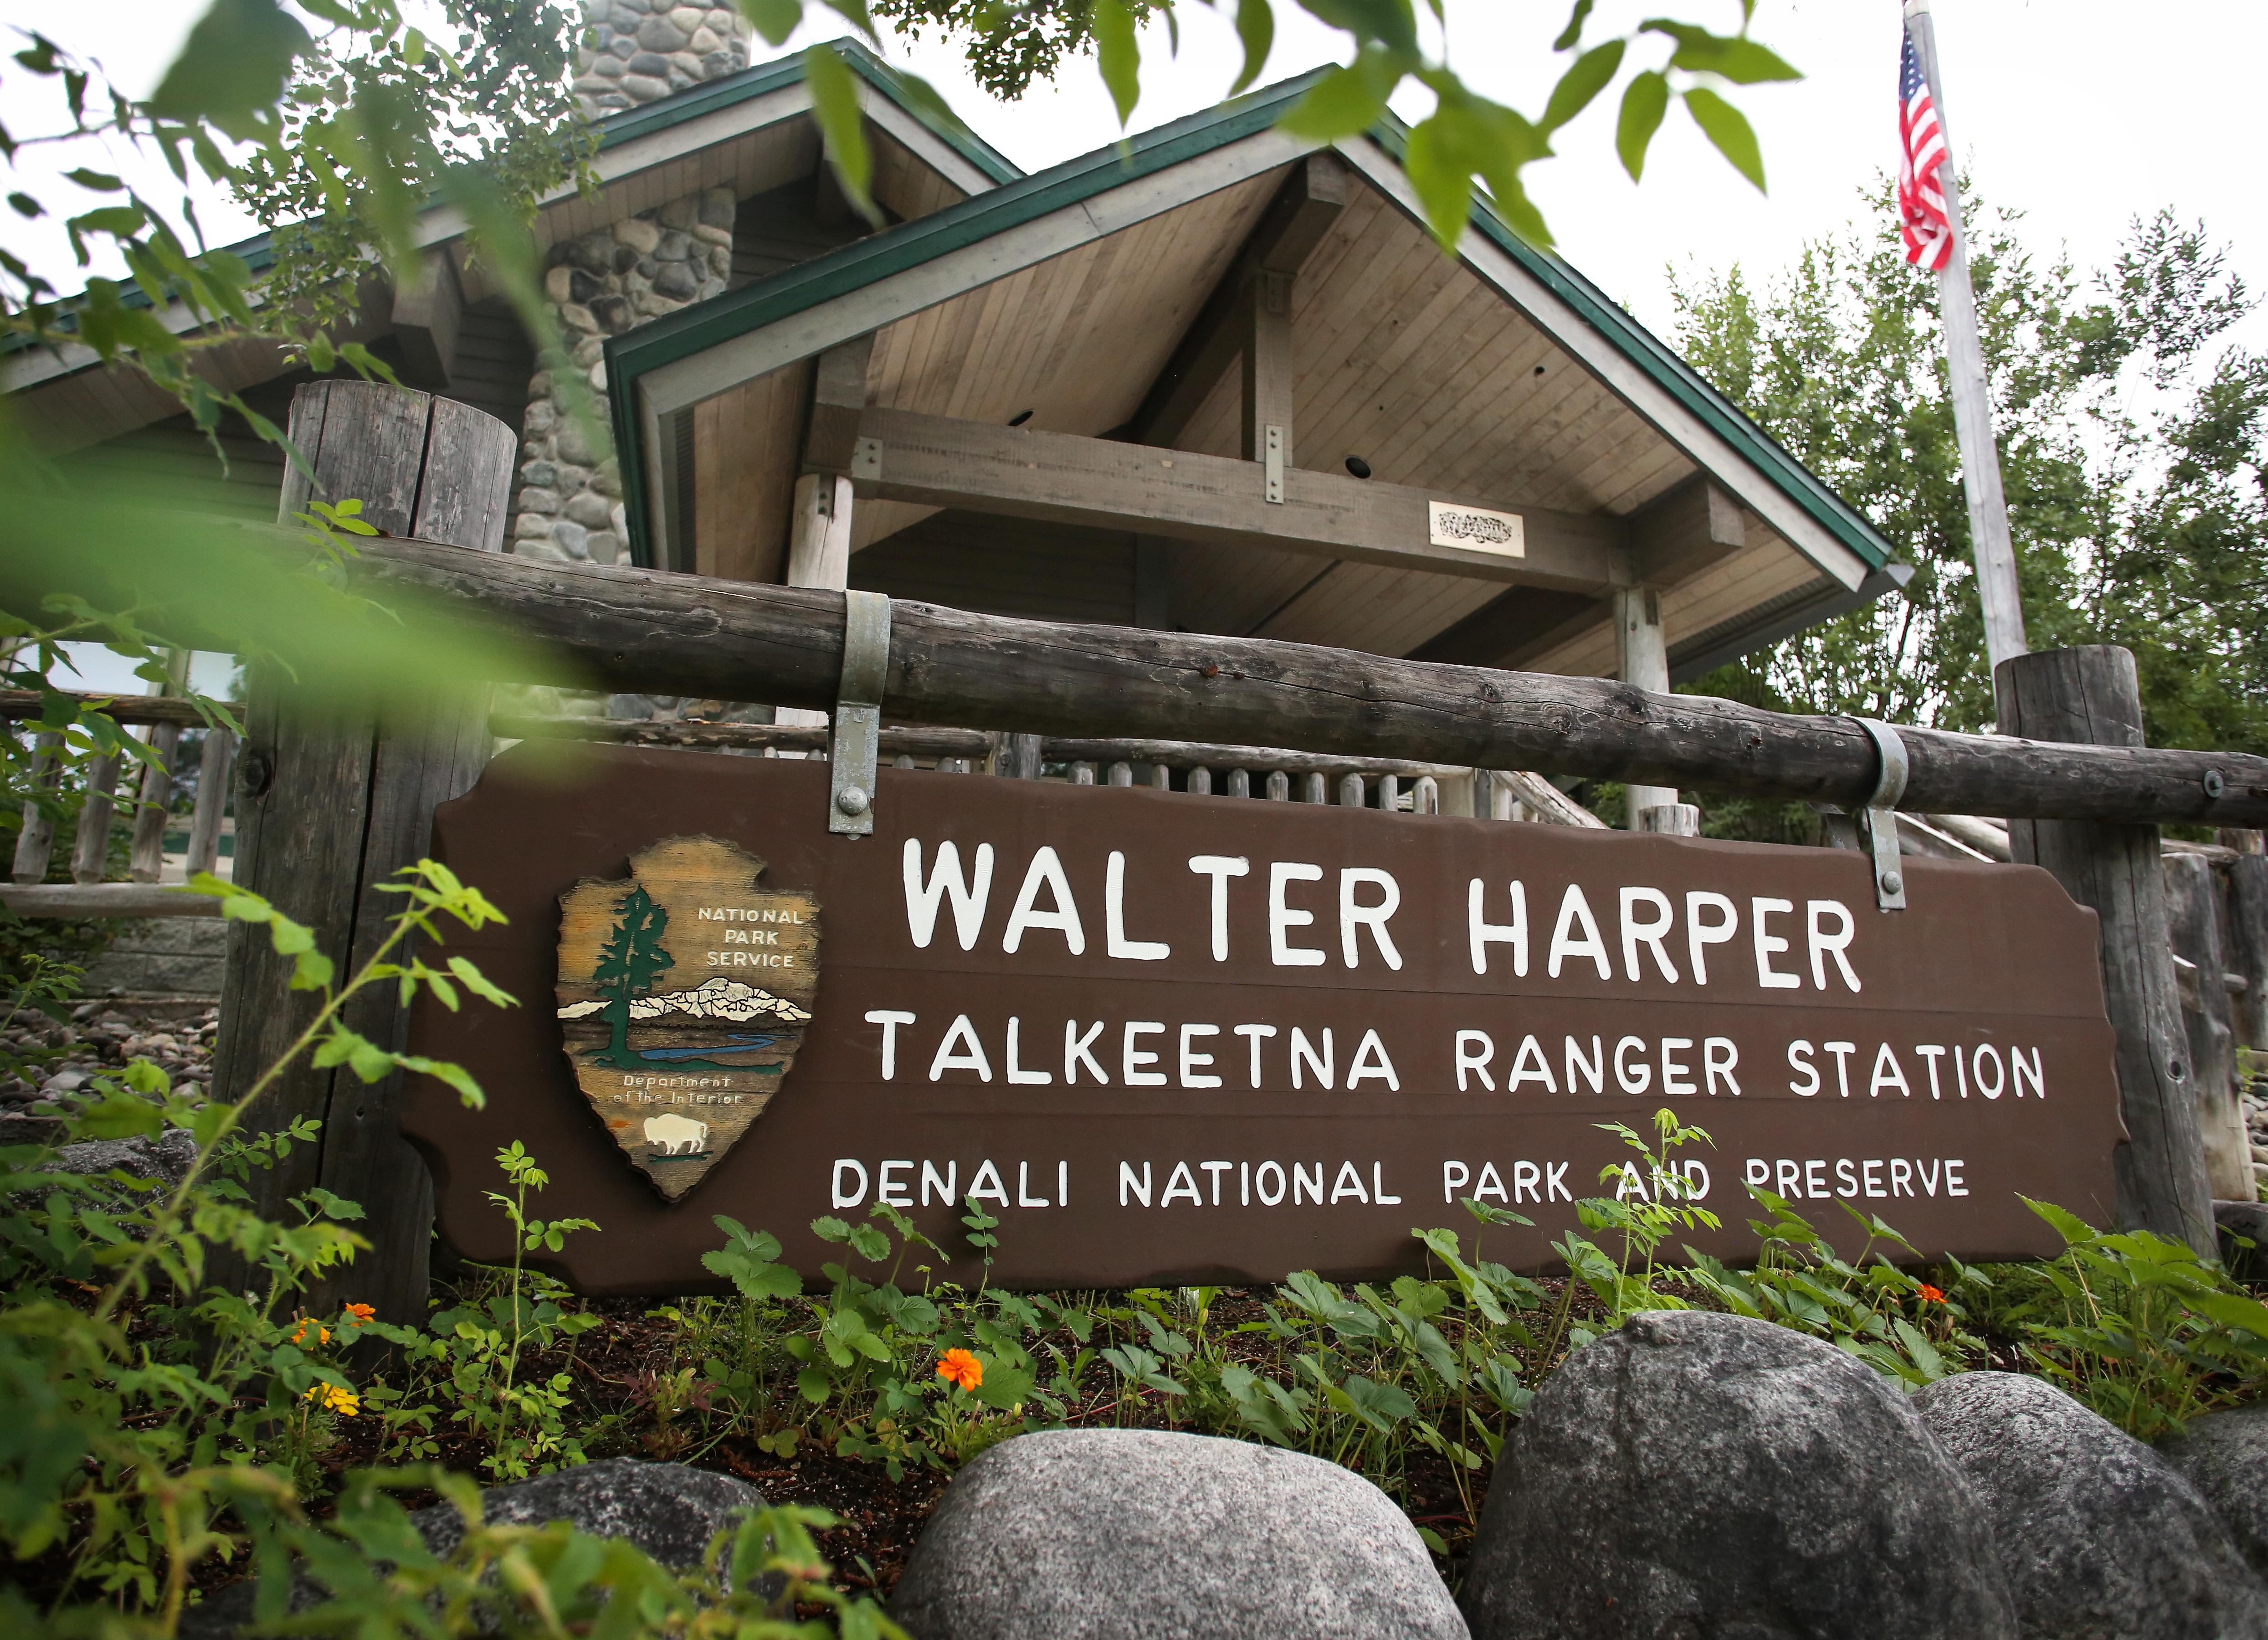 New to me!  The Ranger Station